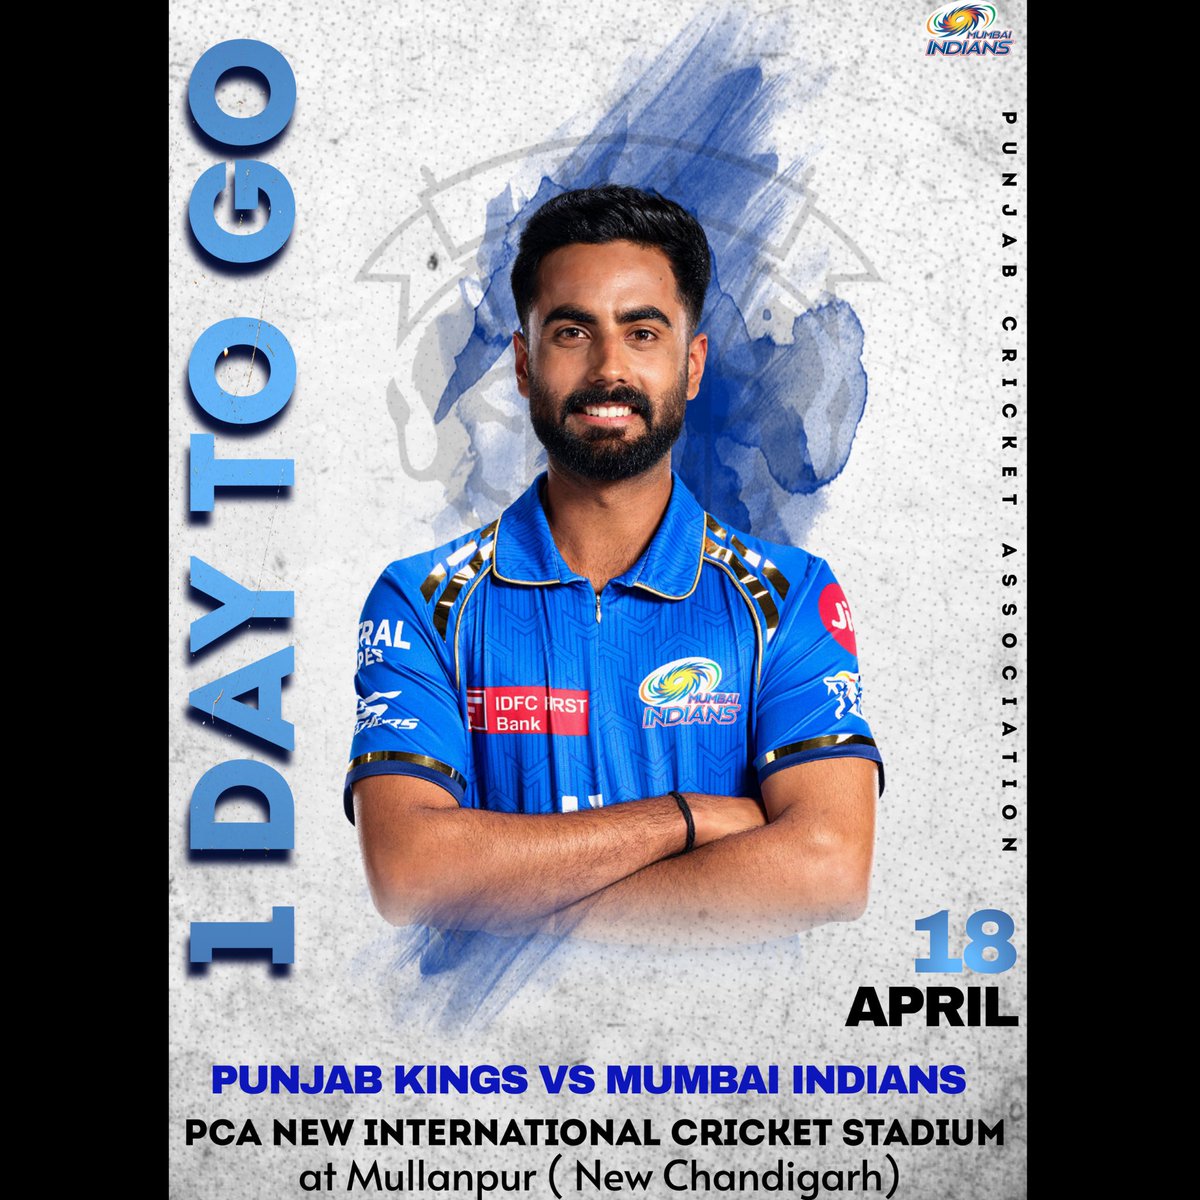 The Heat Is On: Save the date, as Punjab Kings take on Mumbai Indians in an exhilarating cricket showdown on April 18. Don't miss the action-packed clash of the titans at the PCA International Cricket Stadium in Mullanpur.